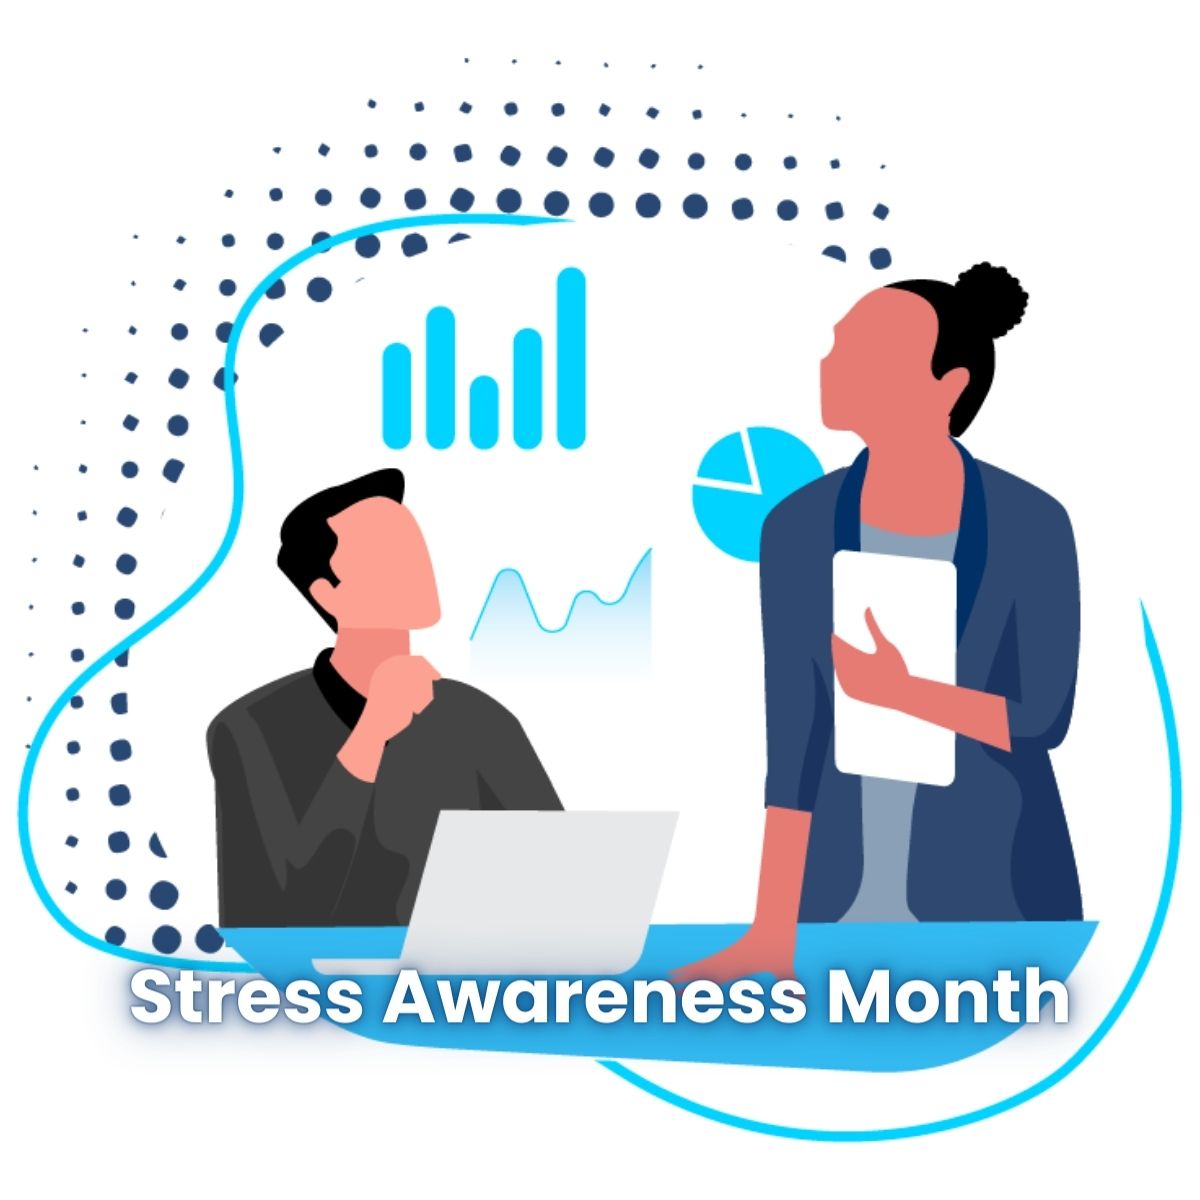 Ease stress for your policyholders this #StressAwarenessMonth! Trust Epoq's #LegalTech and #InsurTech to offer comprehensive support, fostering peace of mind and reducing stress levels. Contact us to learn more! ☎️📲💻 

#InsuranceProviders #InsuranceBroker #InsuranceAgent